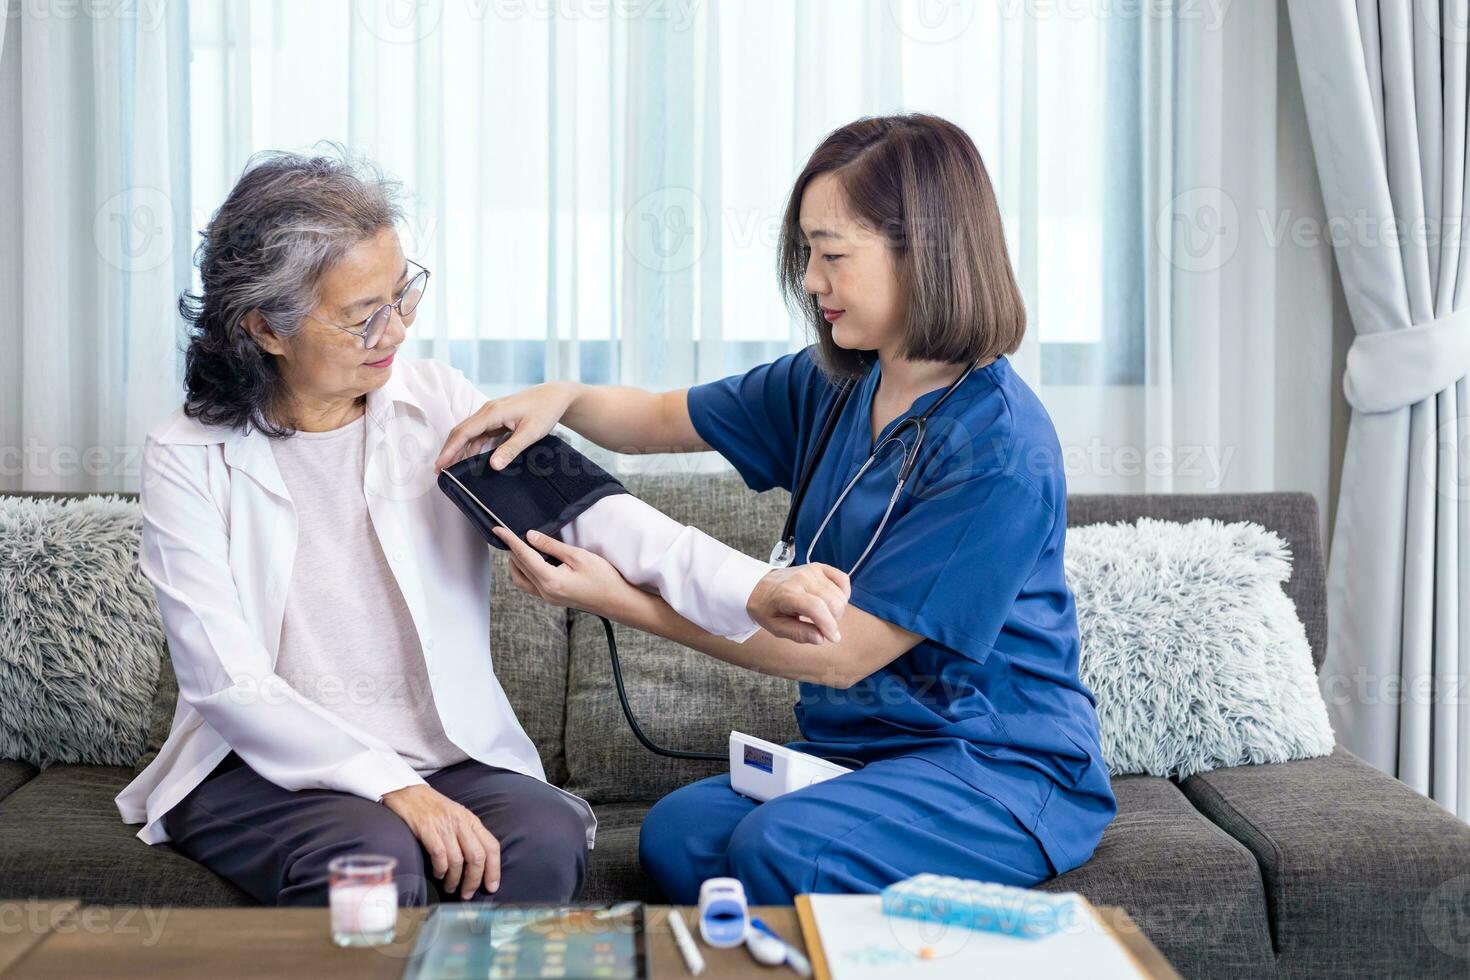 Senior woman got medical service visit from caregiver nurse at home while having blood pressure test using sphygmomanometer on for health care and pension welfare insurance photo